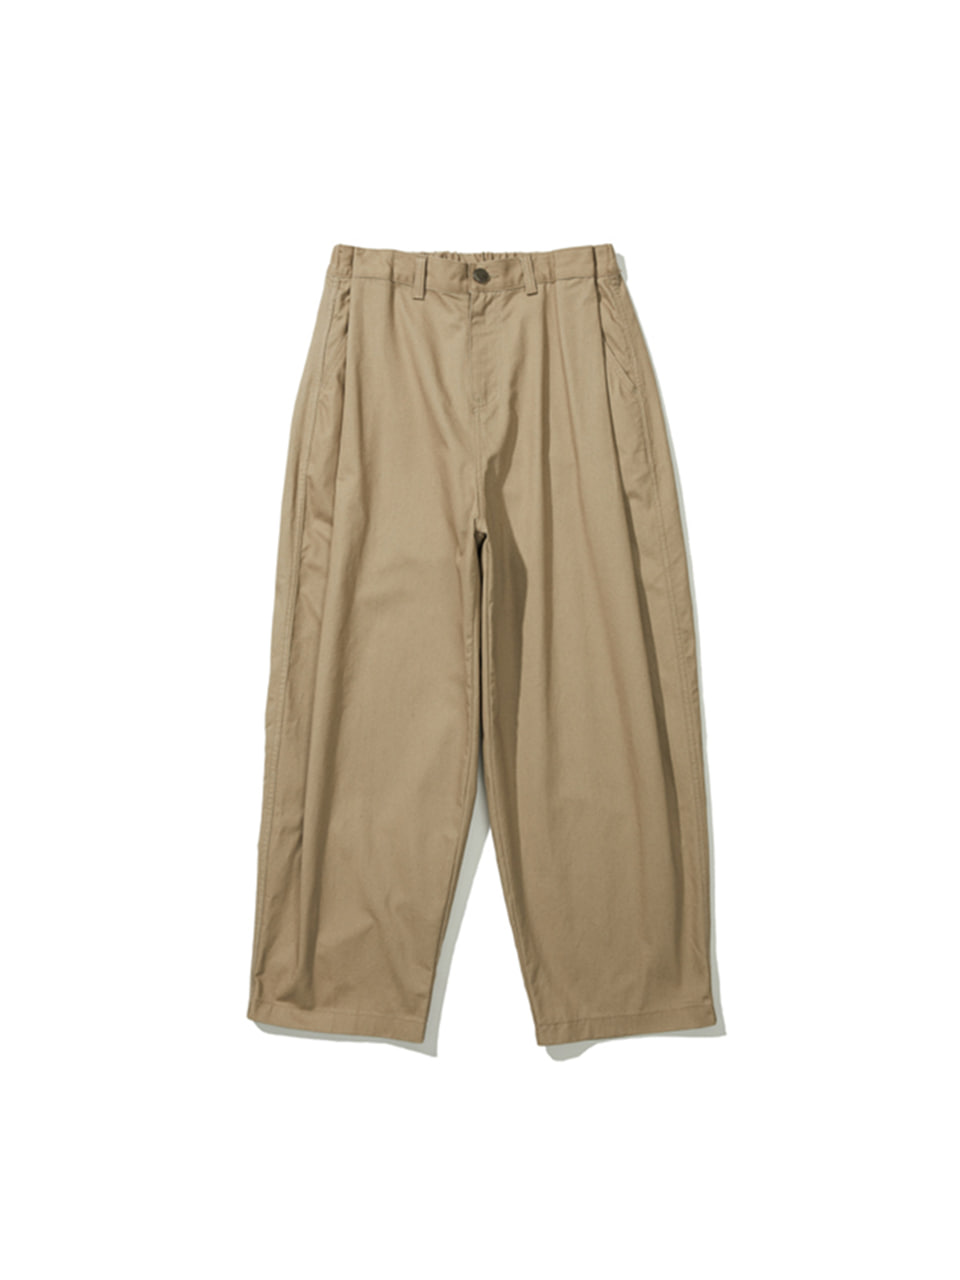 SOUNDSLIFE - New Balloon Snap Pants For FW Beige